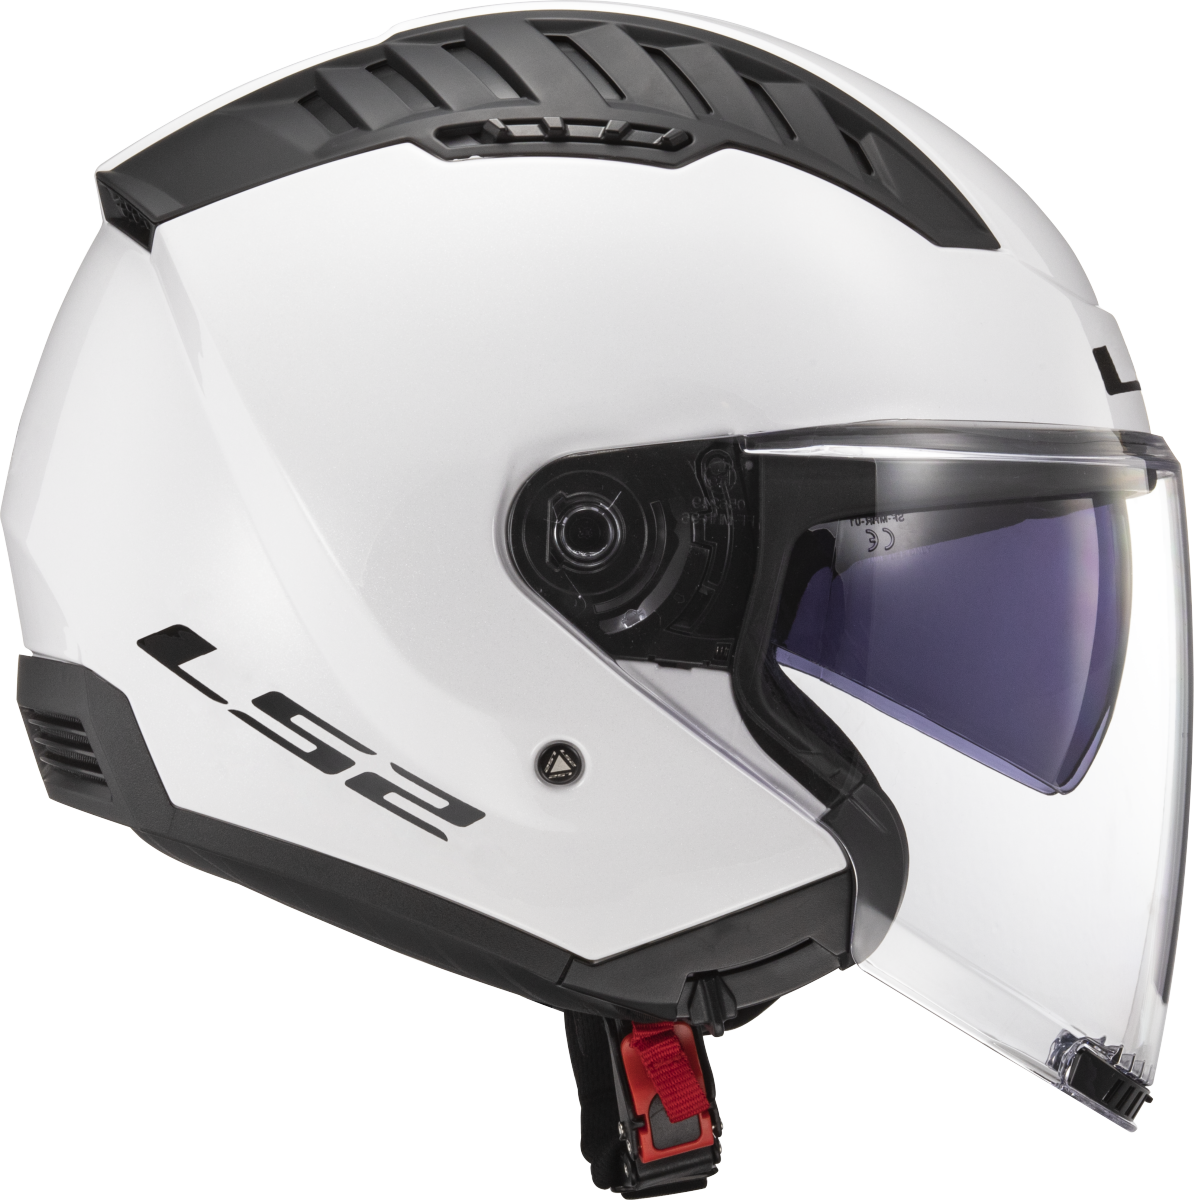 Casco LS2 OF600 COPTER SOLID BLANCO 3